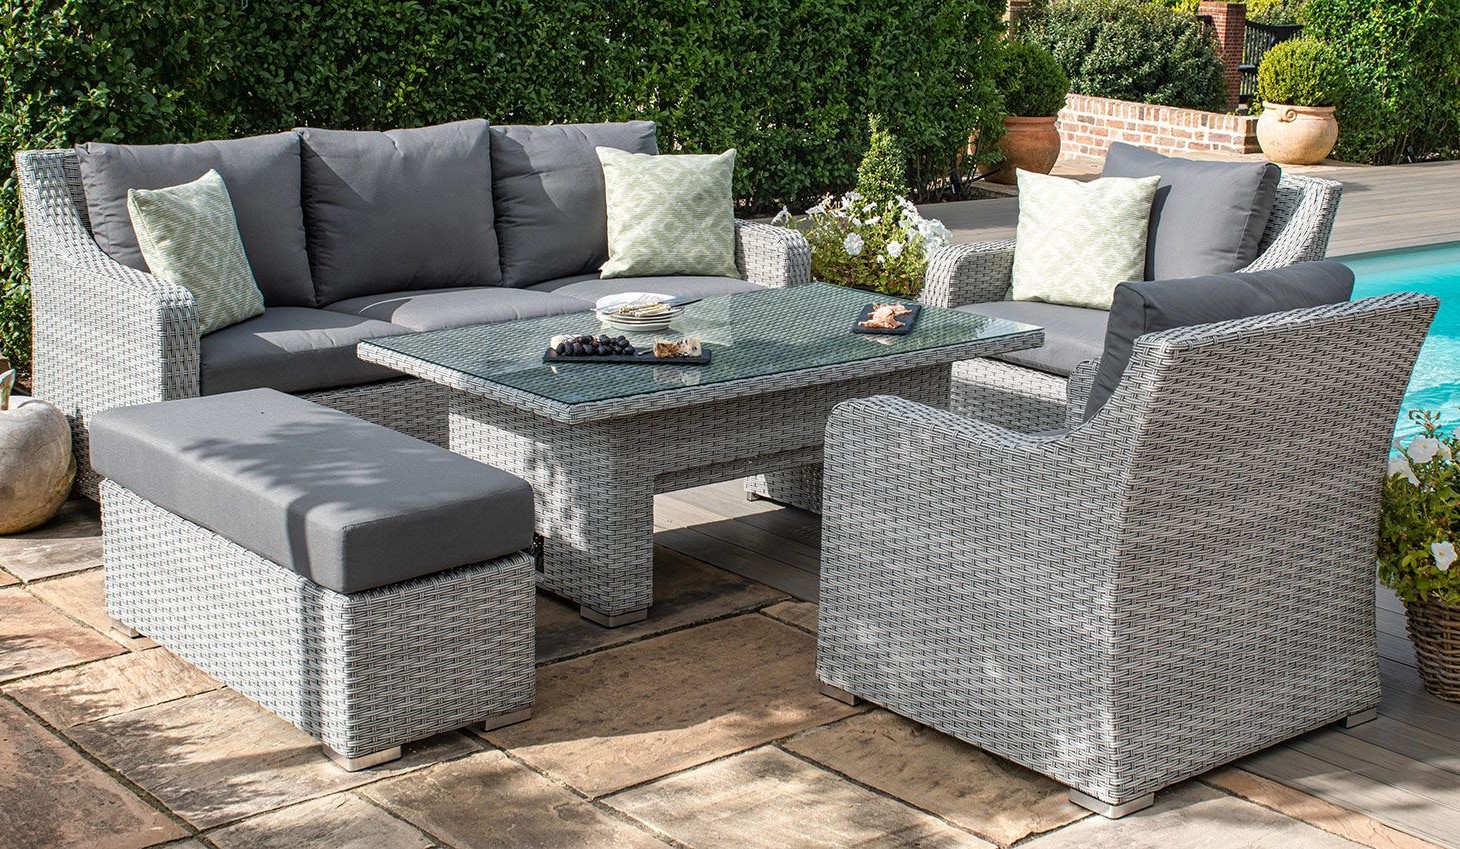 How To Clean & Care For Your Rattan Outdoor Furniture?